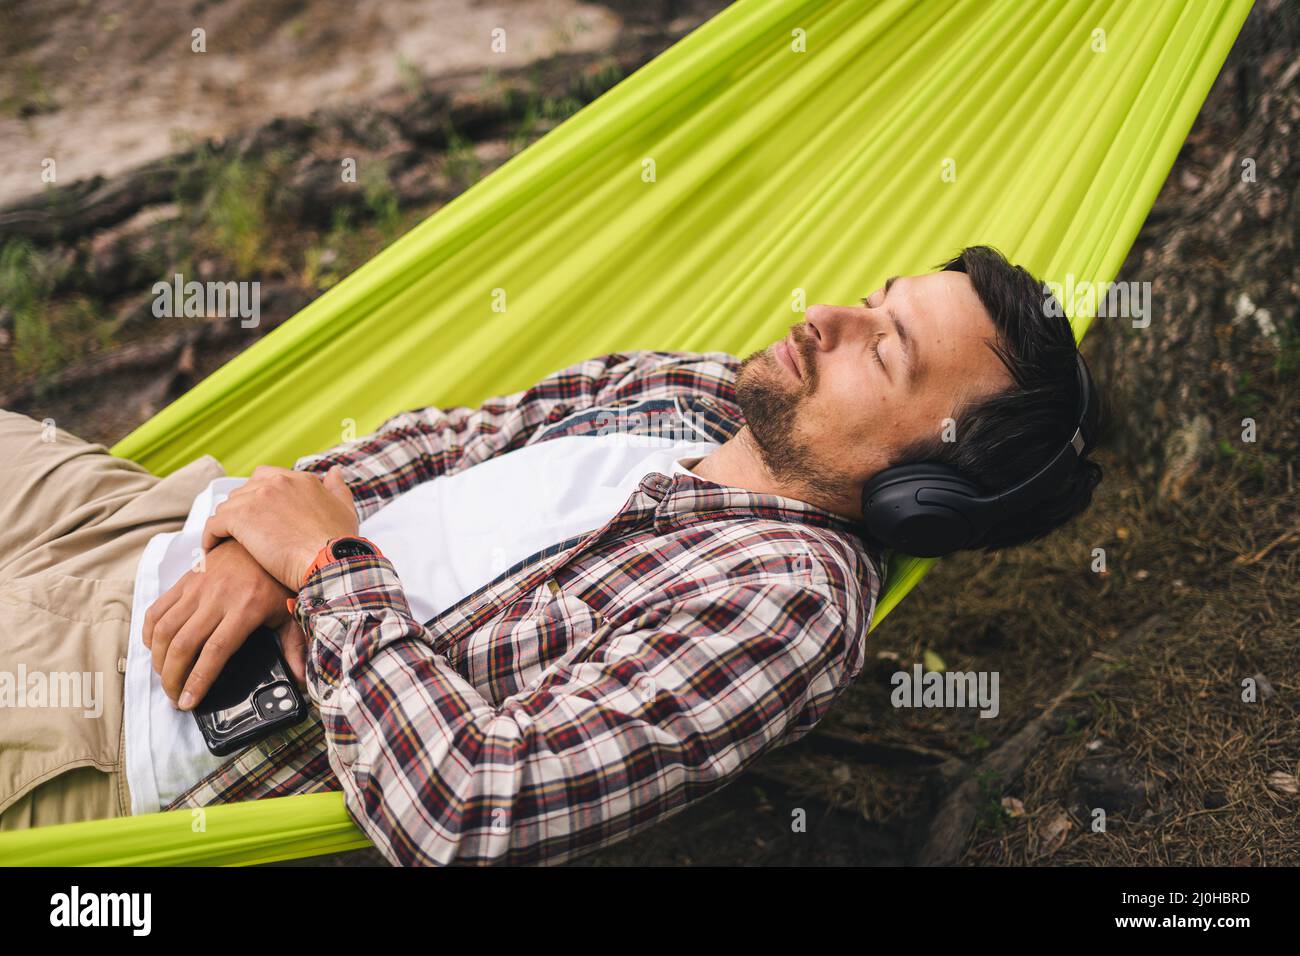 Man on bicycle trip at camping by lake is relaxing in green hammock while listening to music. Active recreation theme in nature. Stock Photo